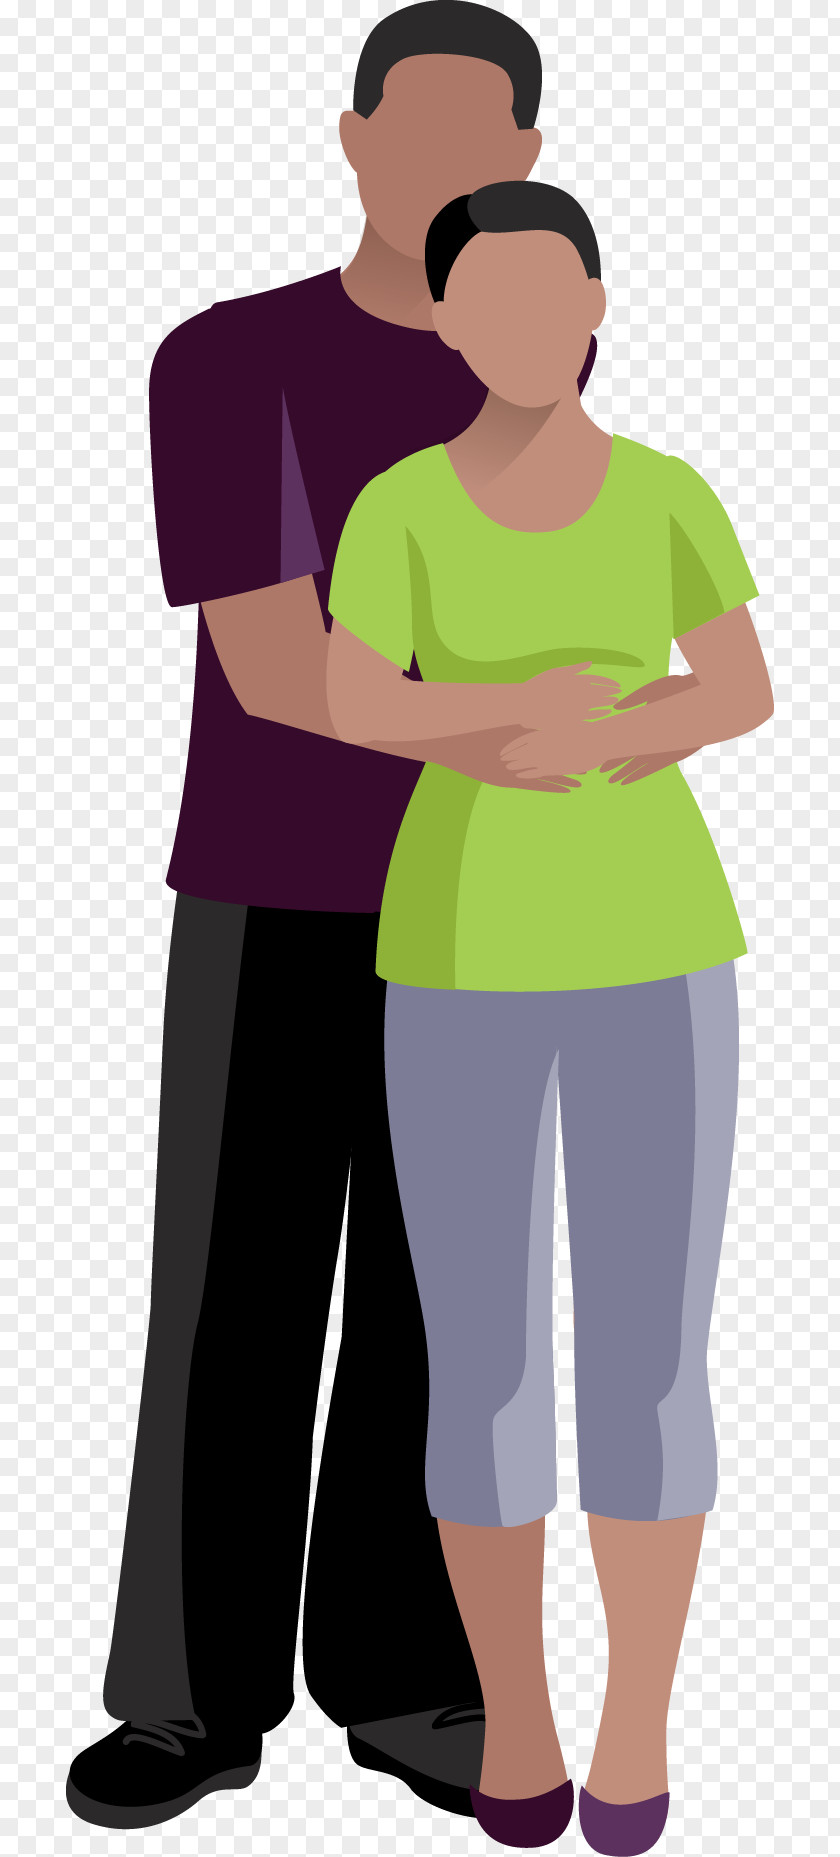 Cartoon Couple Significant Other PNG